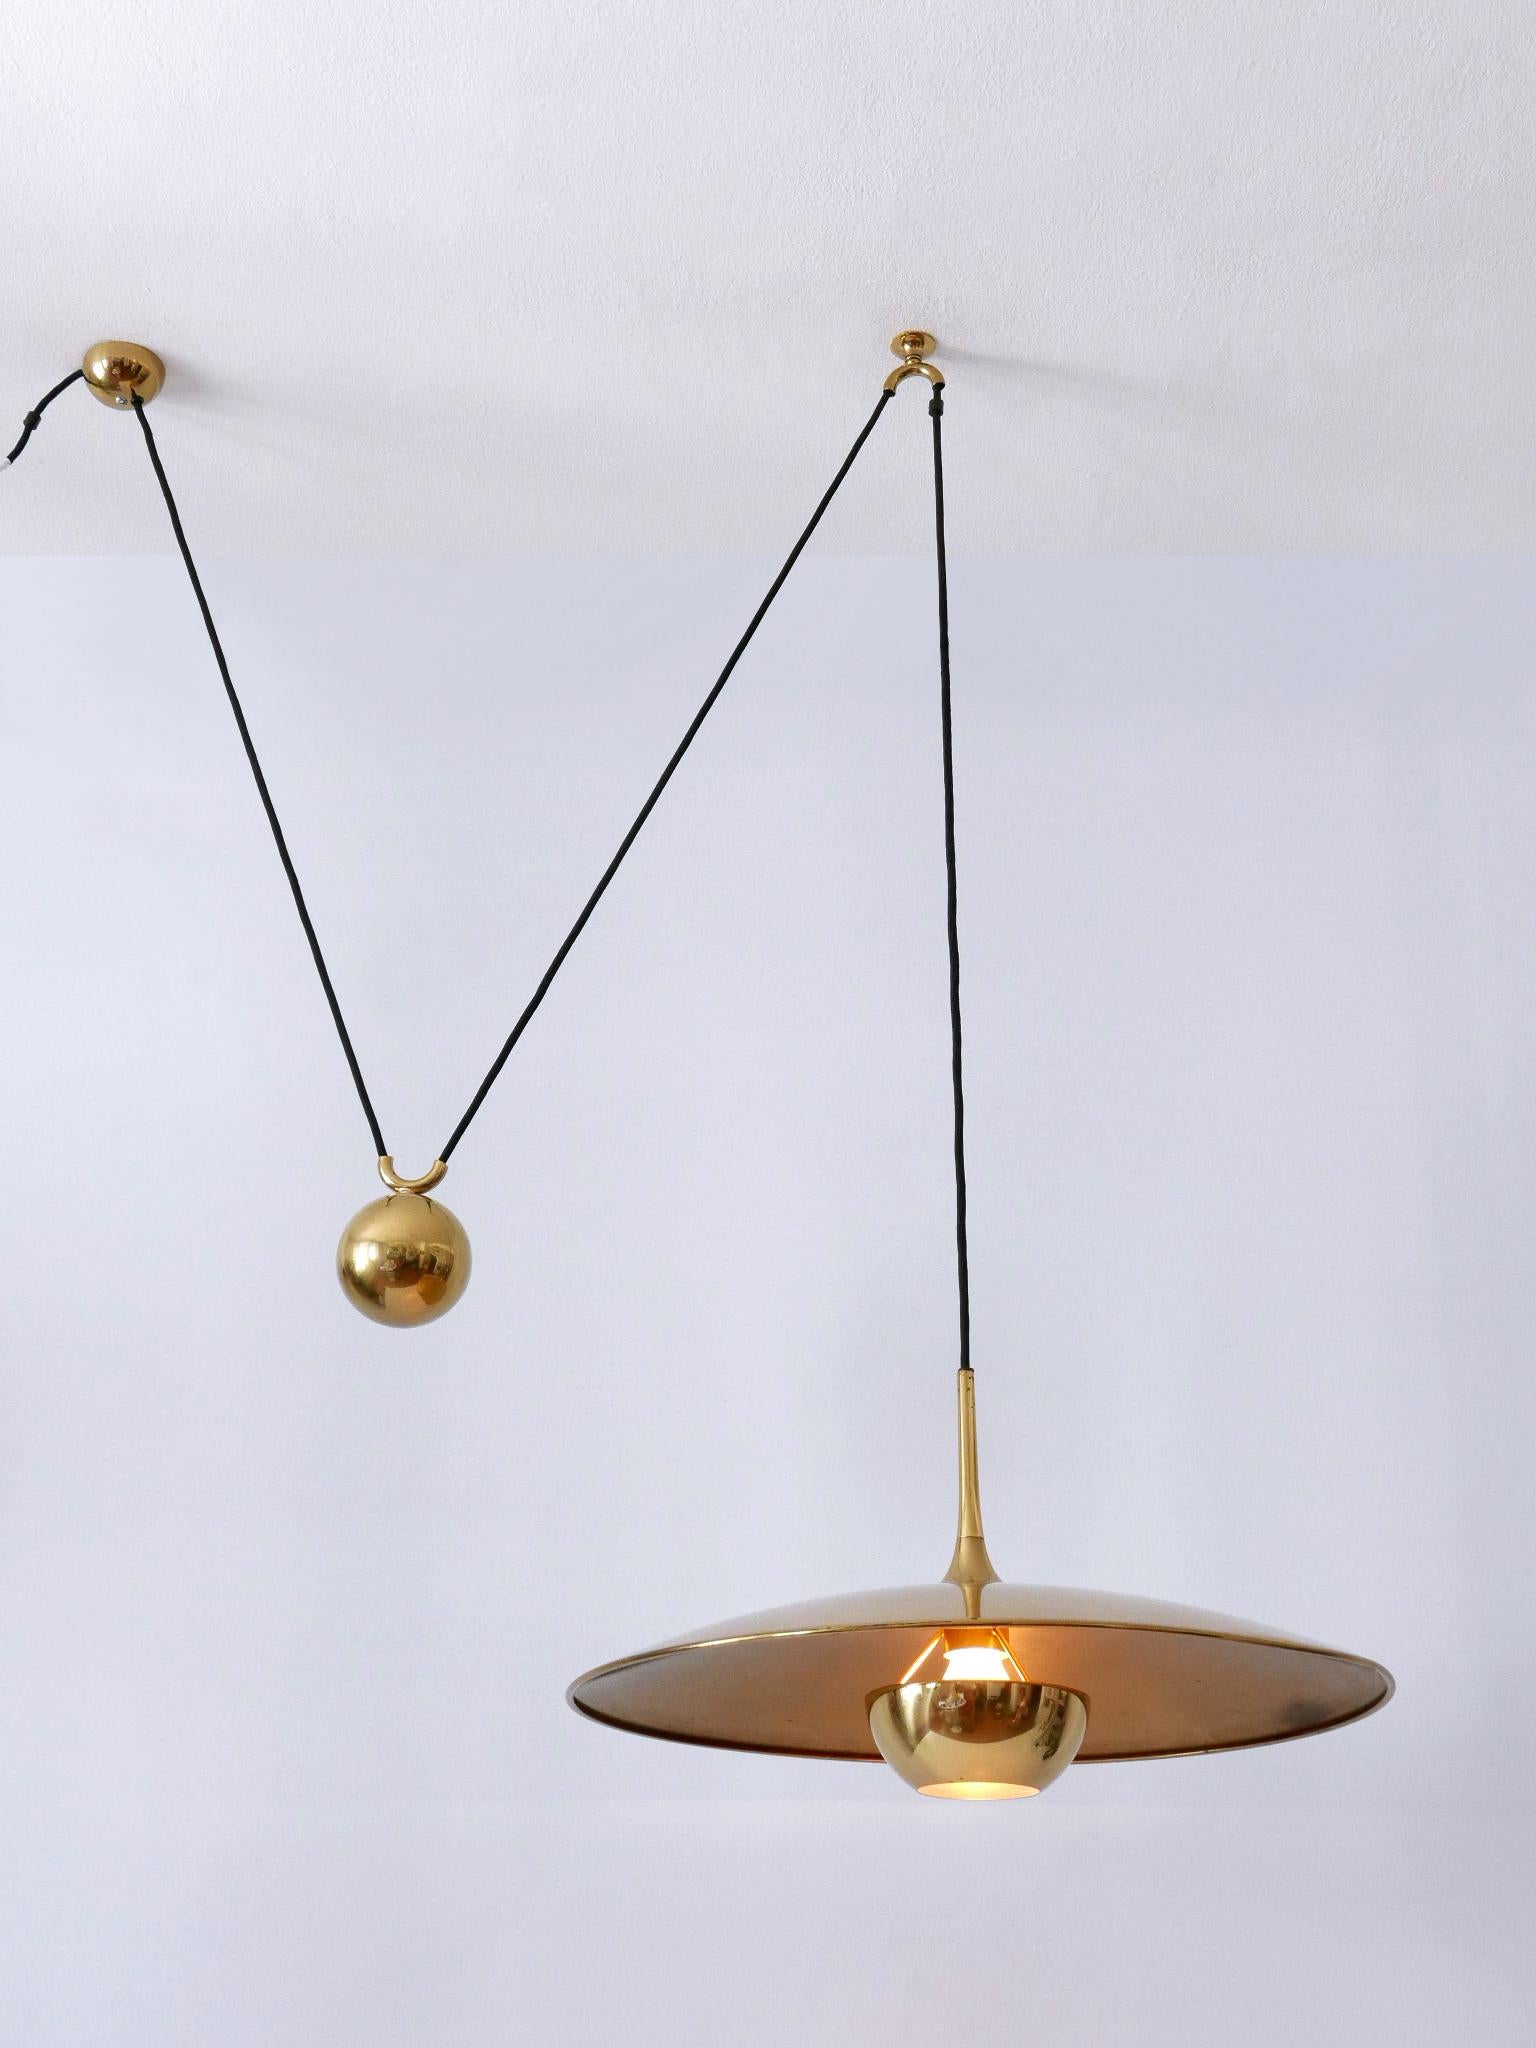 Polished Elegant Counterweight Brass Pendant Lamp 'Onos 55' by Florian Schulz 1970s